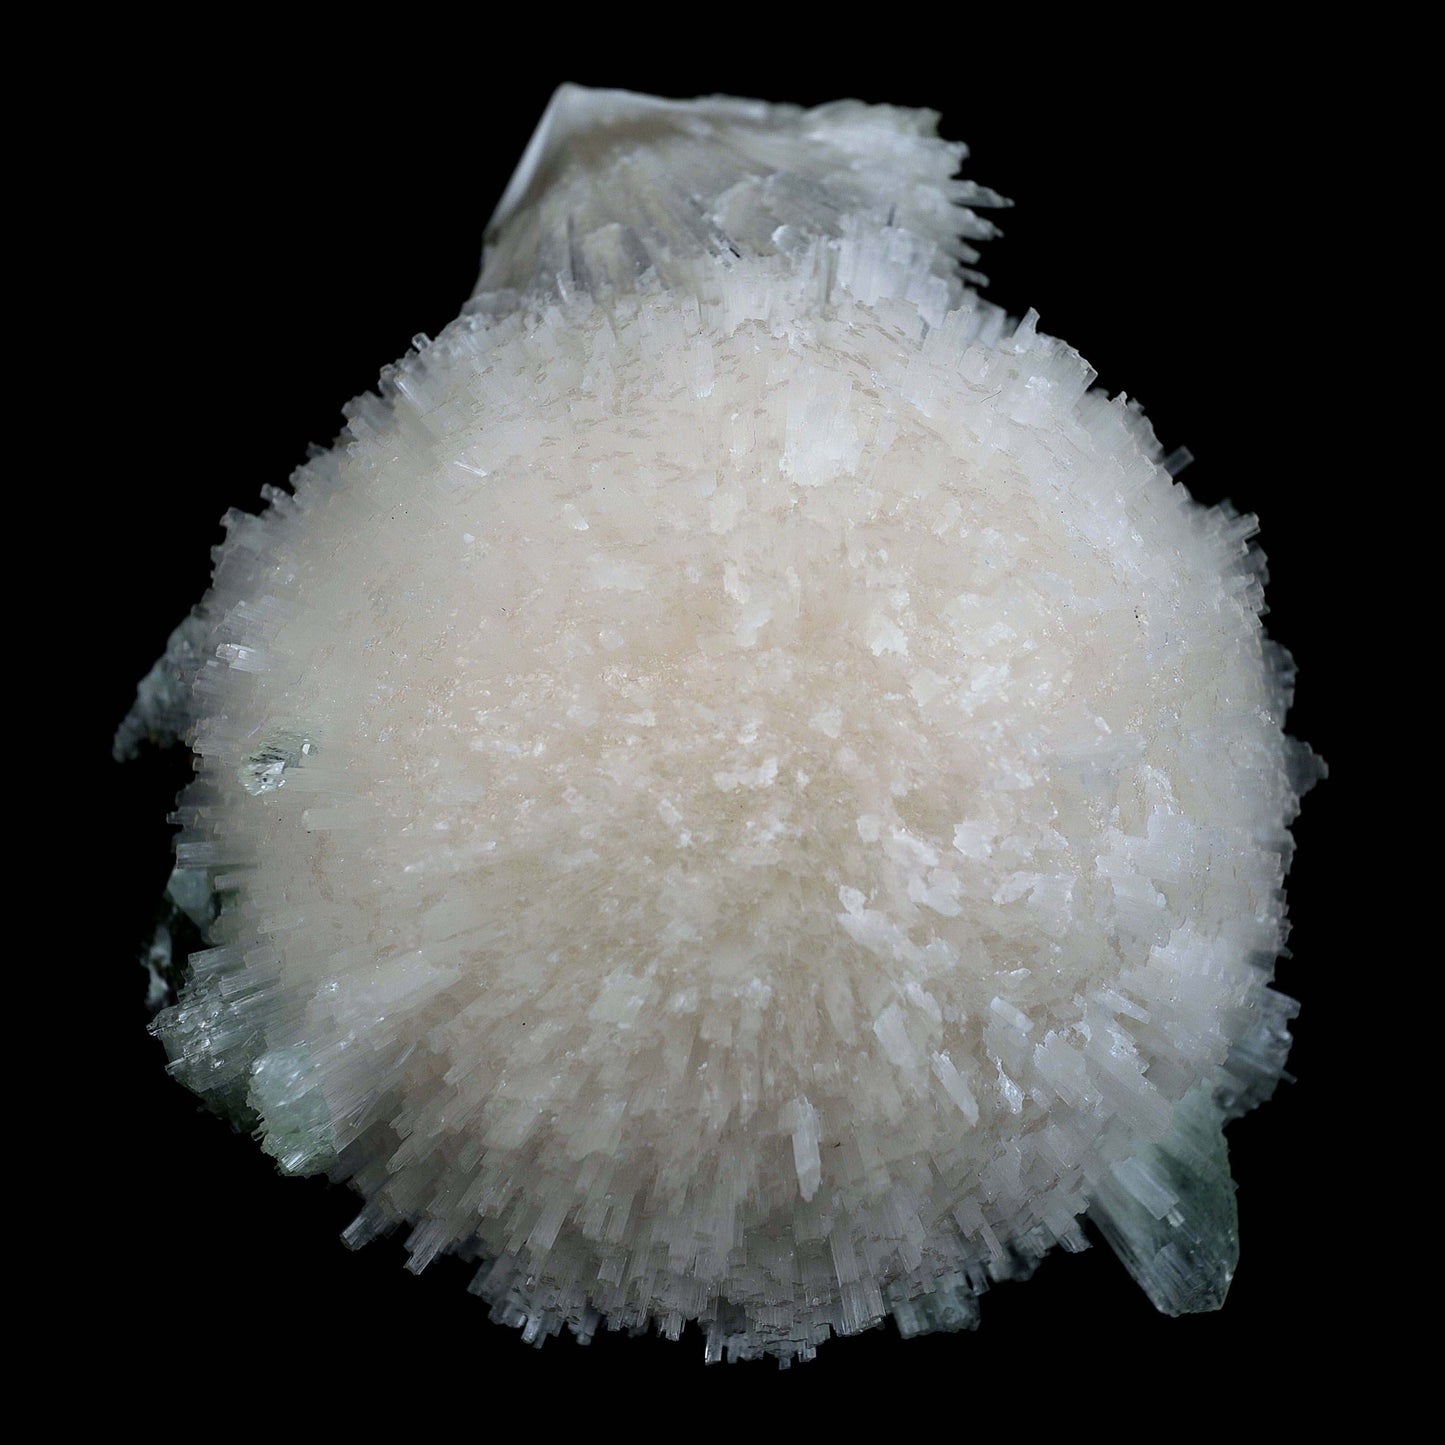 Scolecite Galssy Spehere with Apophyllite Natural Mineral Specimen # …  https://www.superbminerals.us/products/scolecite-galssy-spehere-with-apophyllite-natural-mineral-specimen-b-4609  Features: A rich porcupine quill spray of glassy scolecite needles is artfully placed over a basalt substrate coated in mint-green, frosted Tetragonal Apophyllite crystals.Large combination material that is both exceptional and uncommon in today's market. Primary Mineral(s): Scolecite